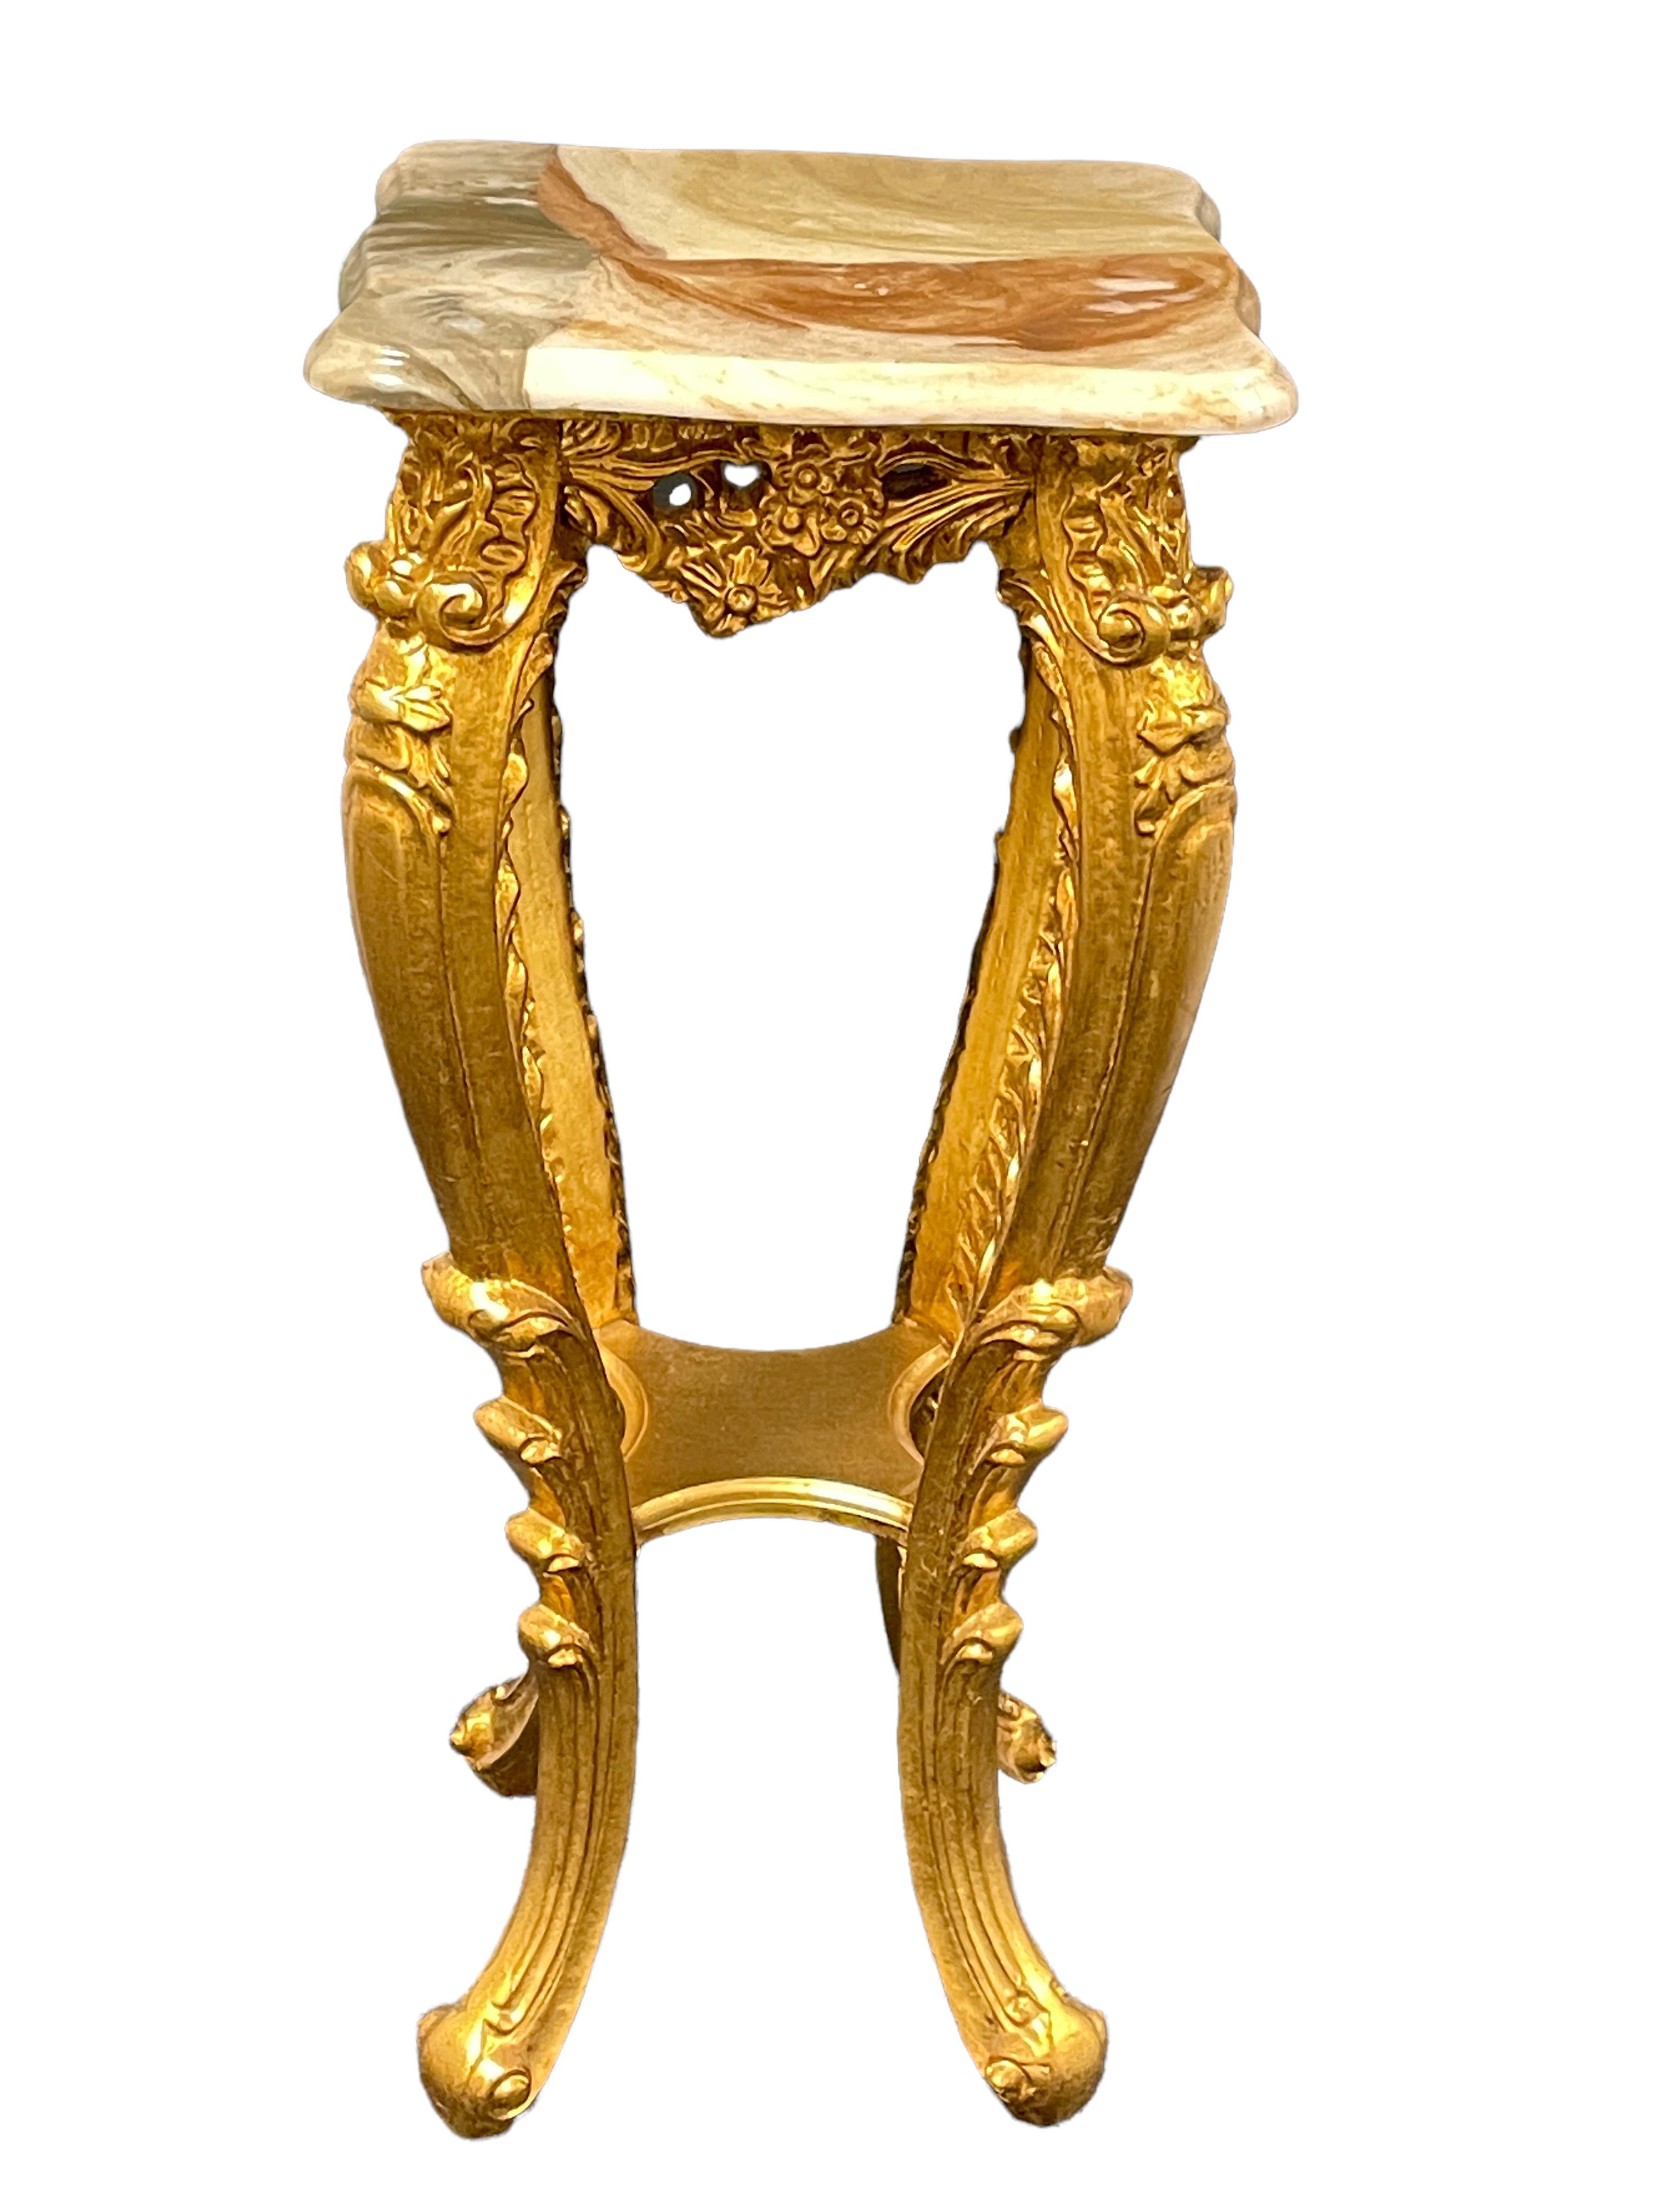 A good quality 20th century gilt wood, marble topped console table pedestal in the Hollywood Regency style. It has carved wood and plaster work decoration to the legs and around the rim at the wood under the marble plates. Feet are made in the style